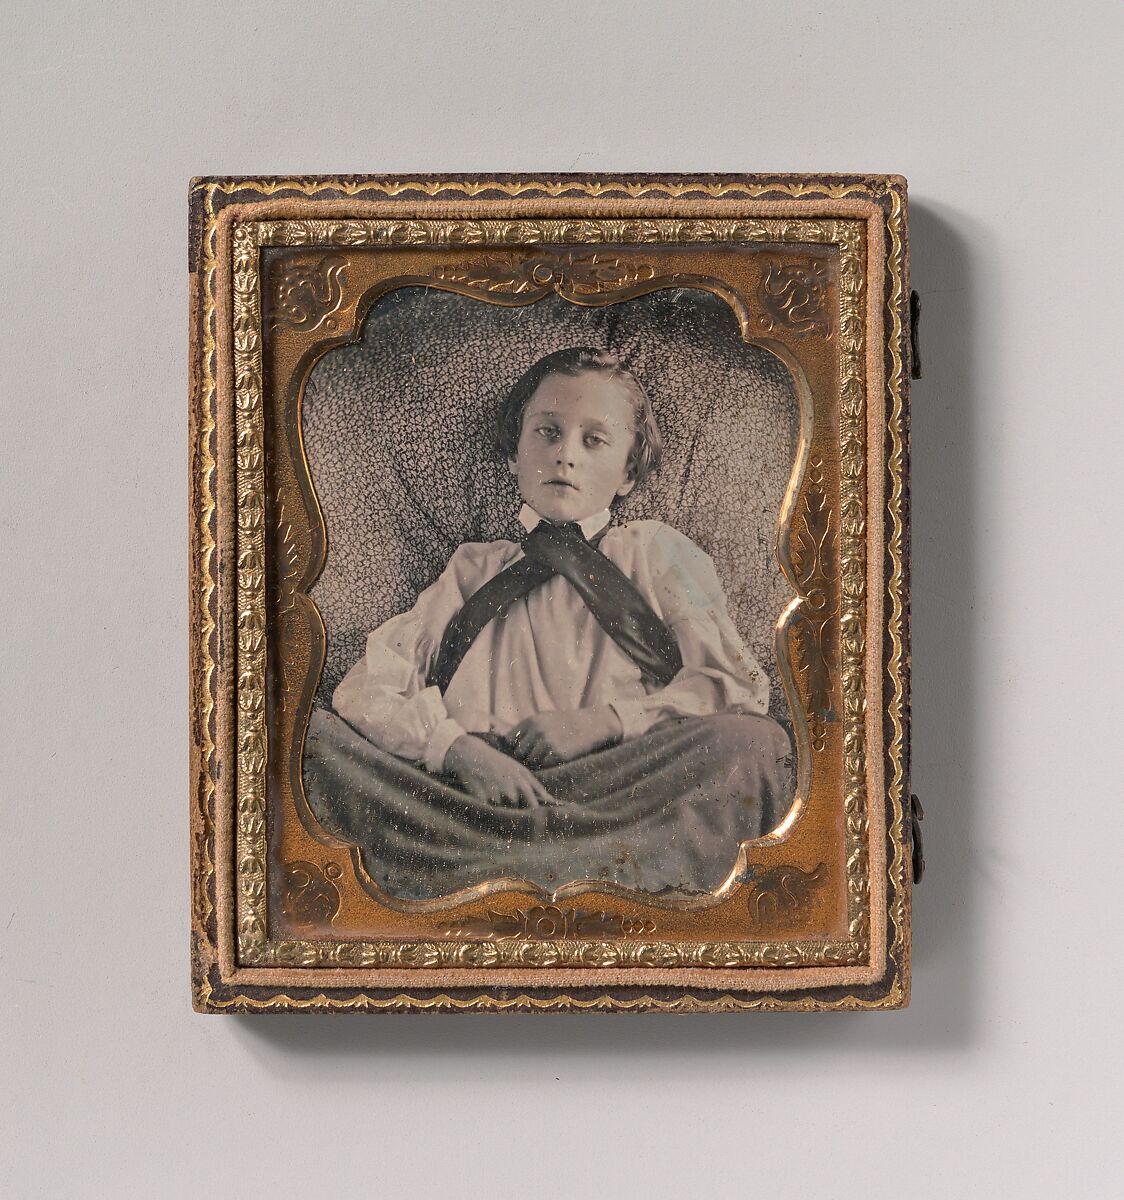 [Boy Seated Cross-legged, Partially Covered by Blanket, Leaning Against Cushion], Unknown (American), Daguerreotype 